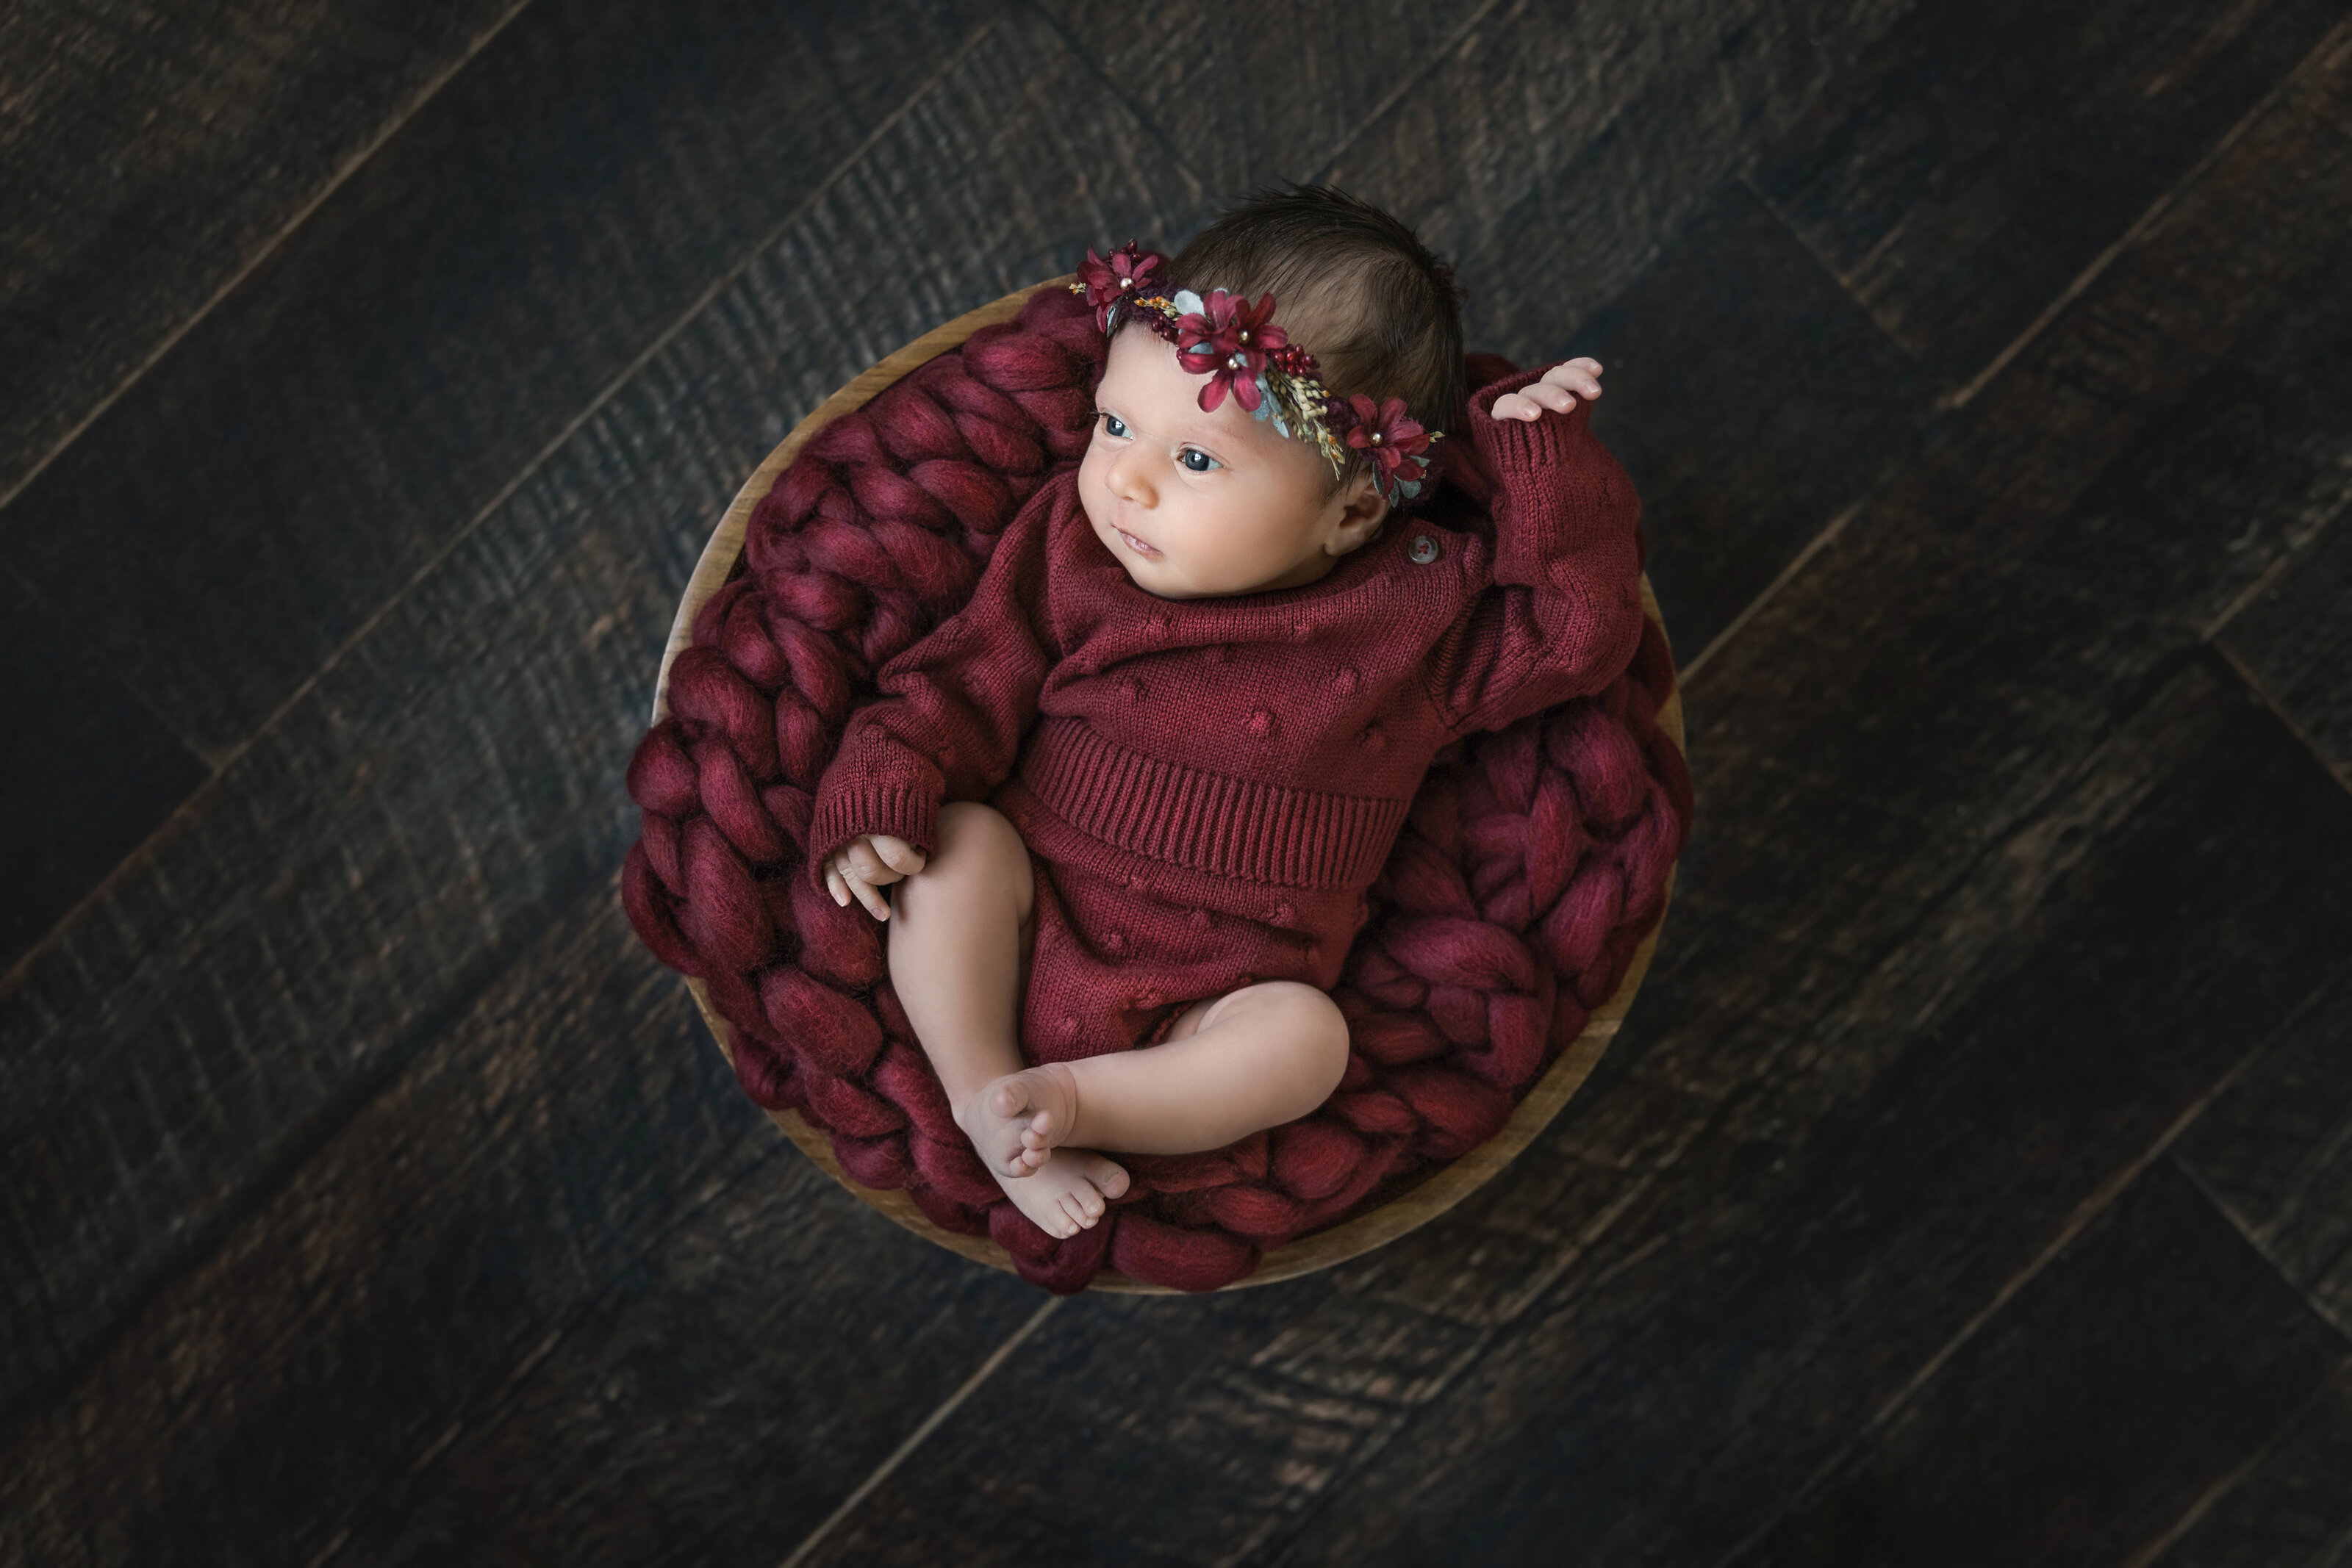 picture of a baby during newborn photography session at nj photo studio.